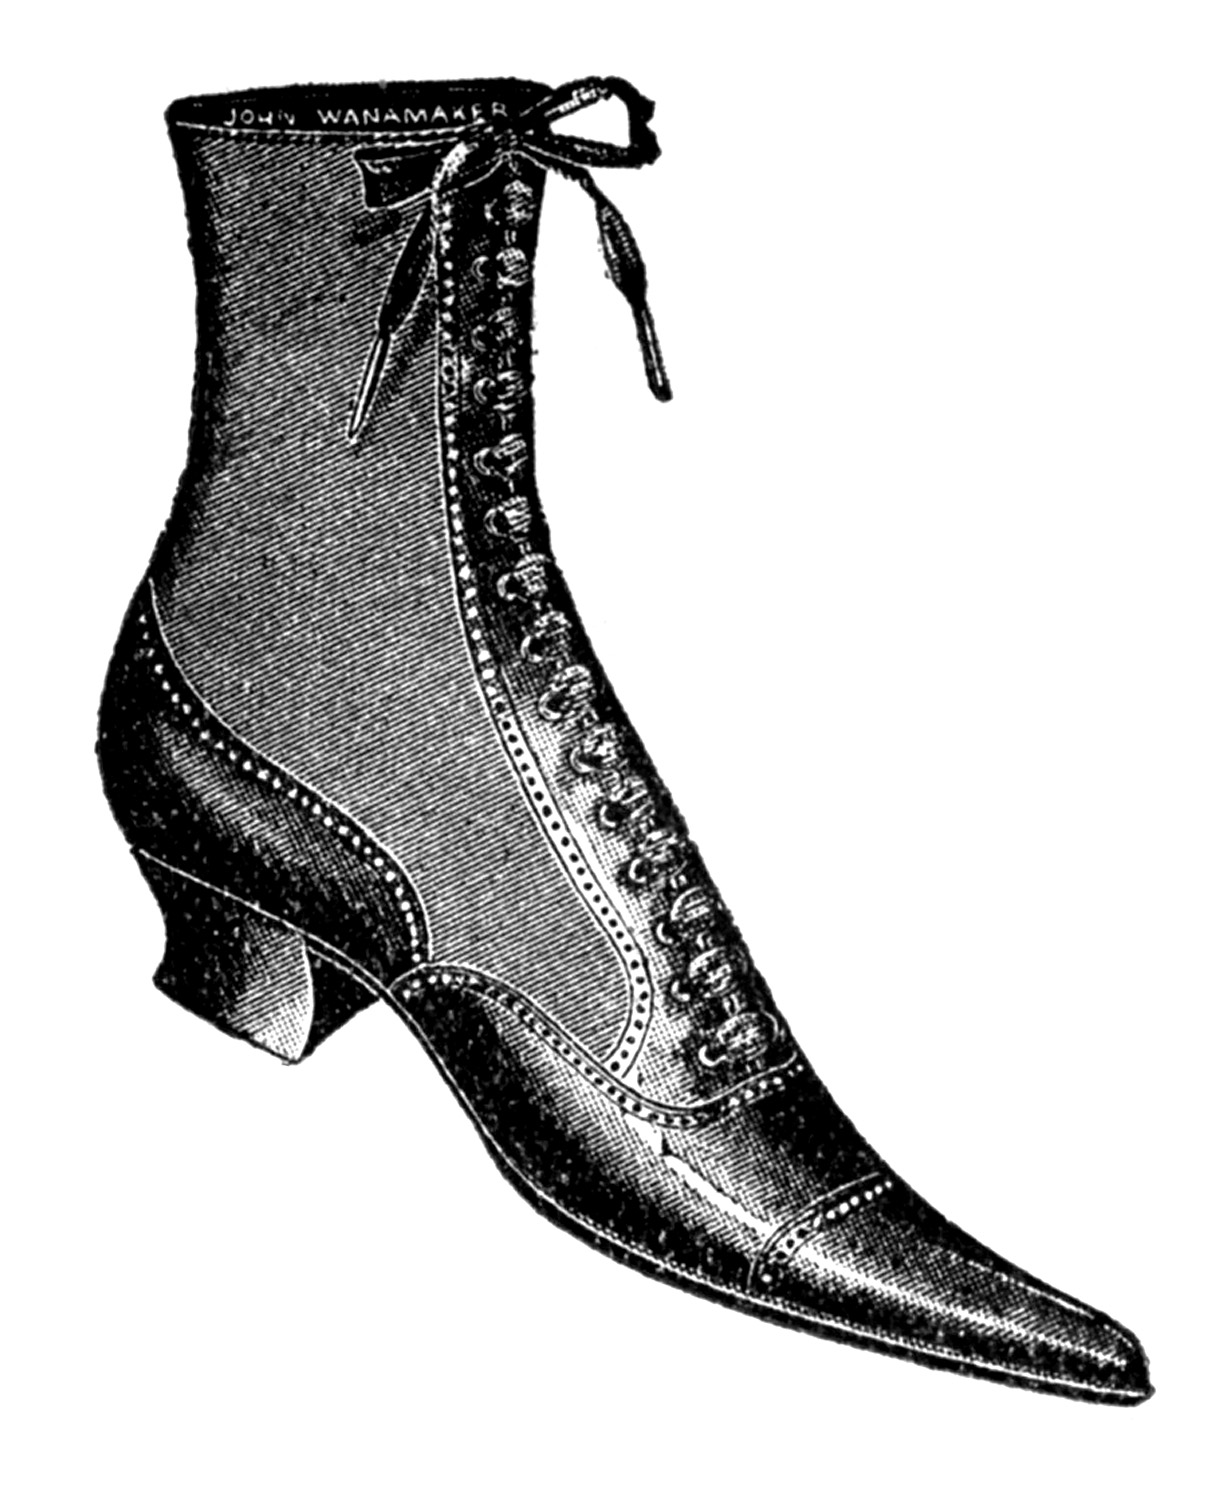 Vintage Clip Art   Ladies Shoes And Boots   The Graphics Fairy